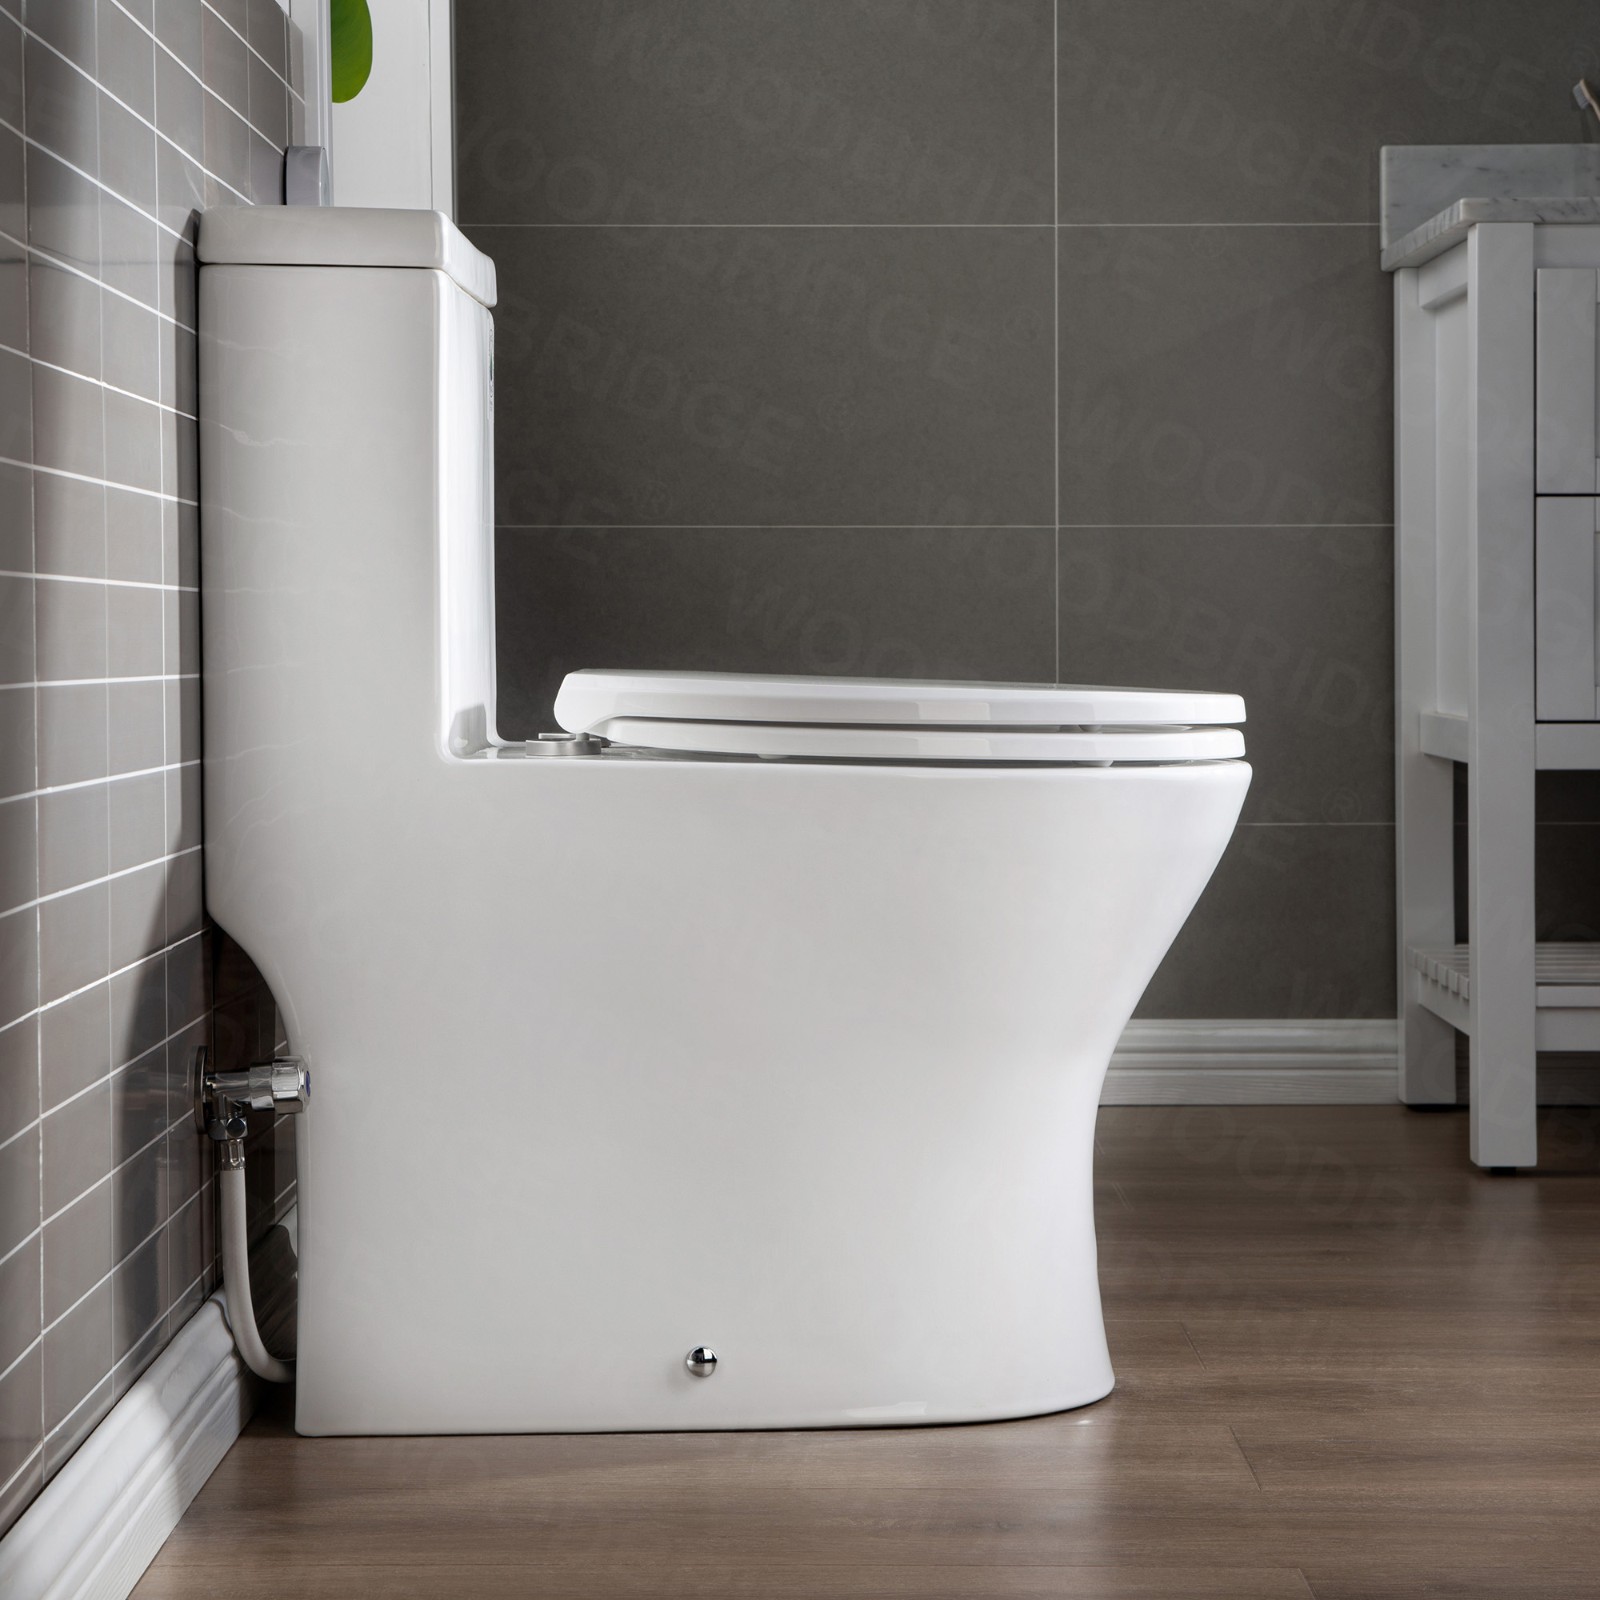  WOODBRIDGE B-0500-A Modern One-Piece Elongated toilet with Solf Closed Seat and Hand Free Touchless Sensor Flush Kit, White_5486